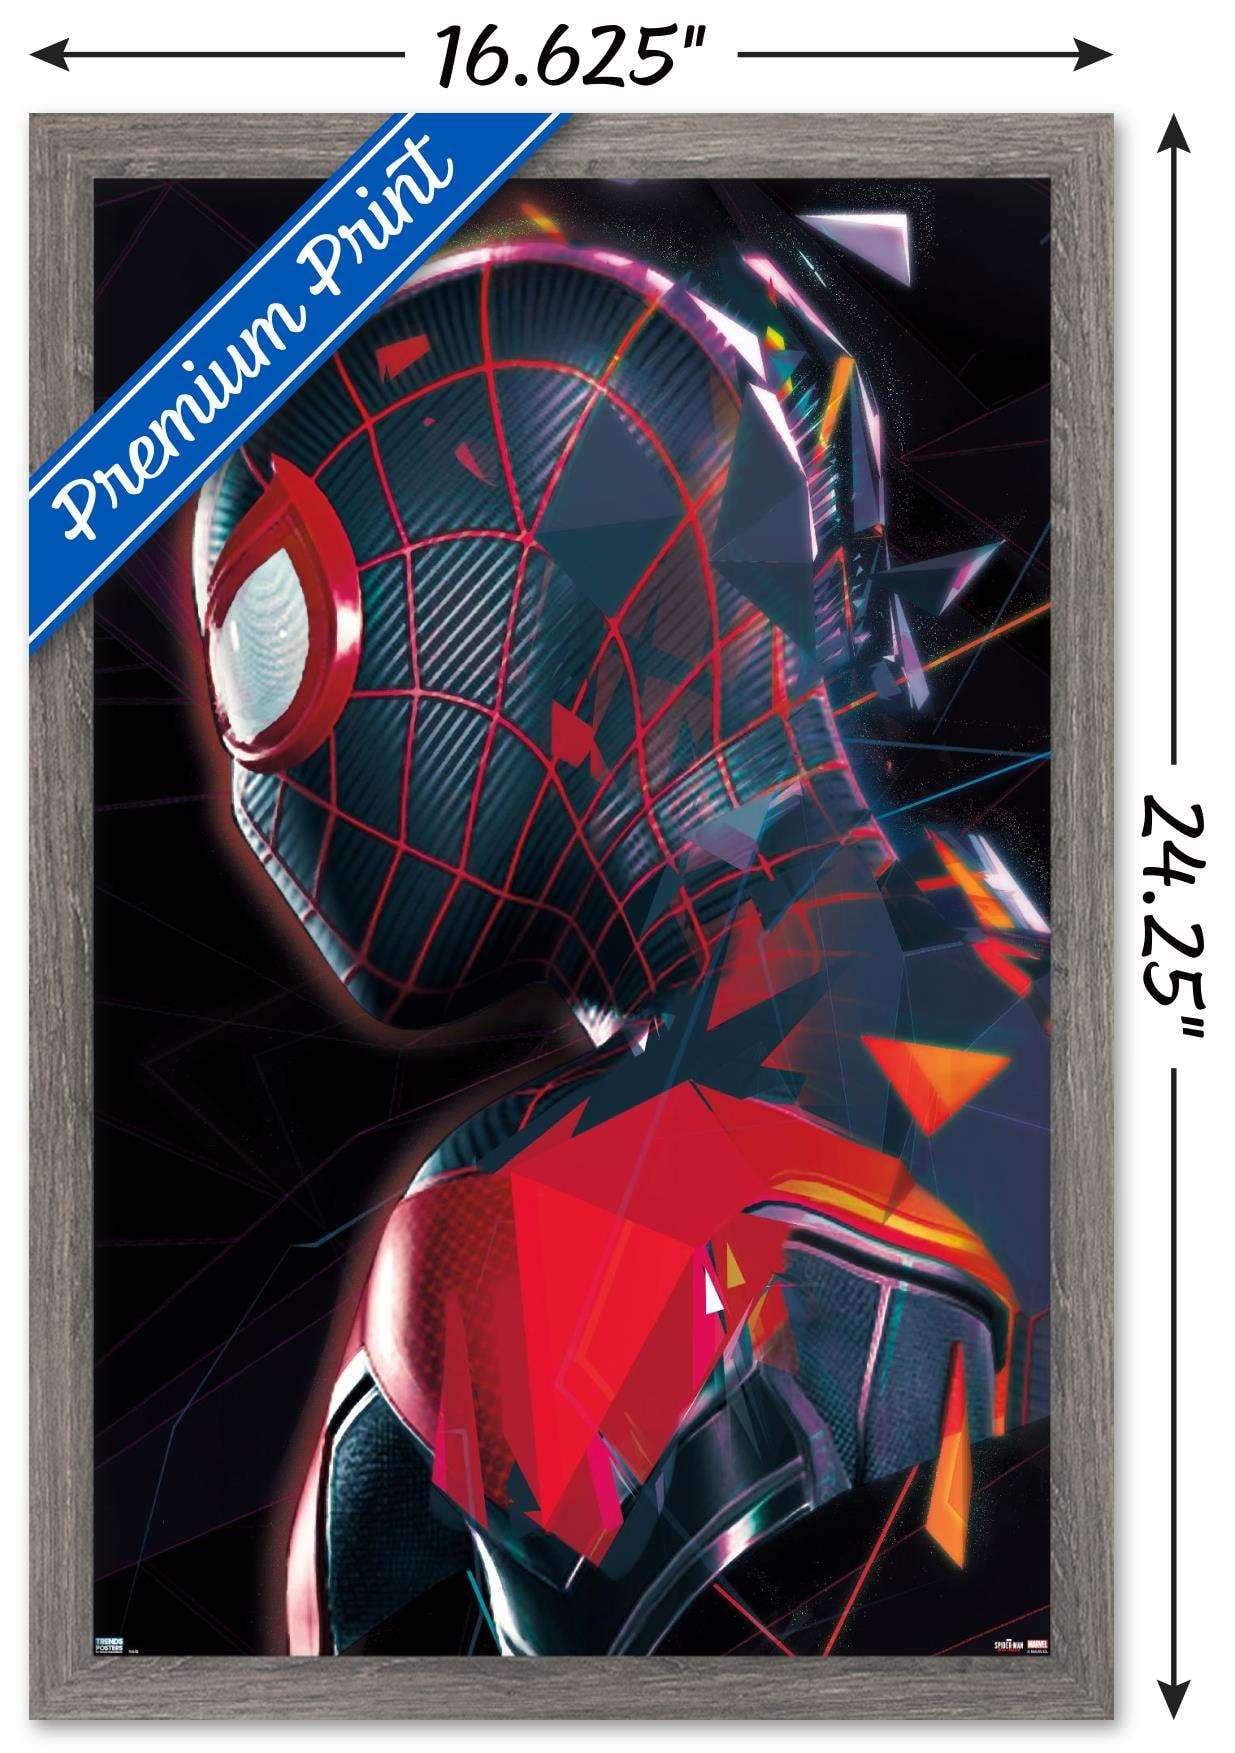 Spider-Man - Protector Of The City Poster, Affiche